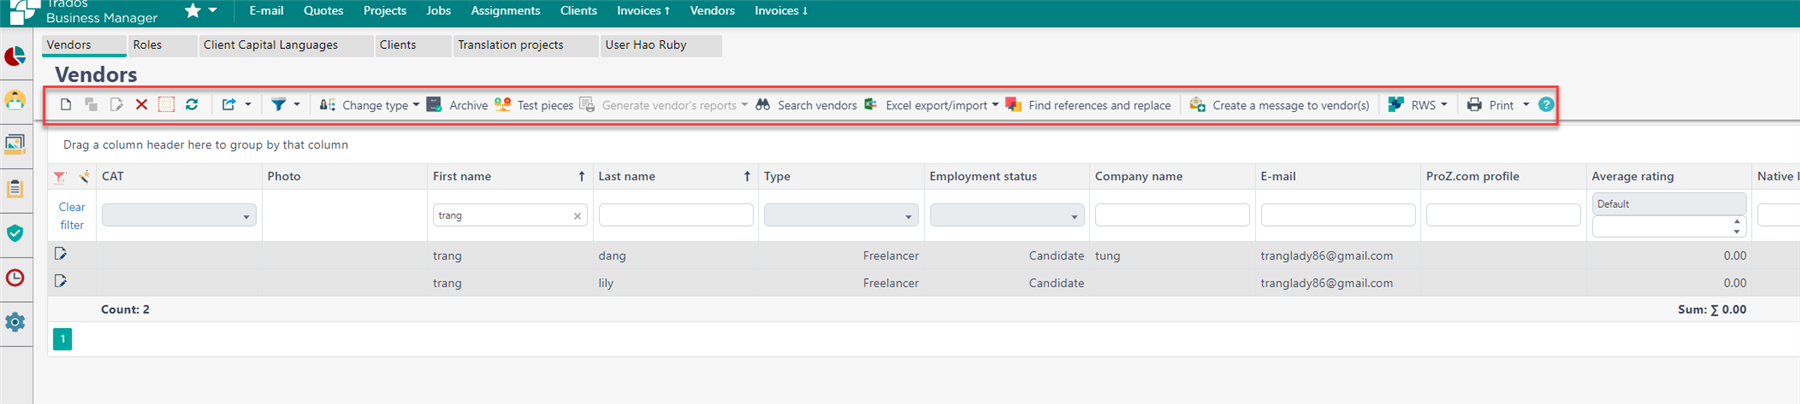 Screenshot of Trados Business Manager showing the Vendors tab with a list of vendors. The batch user creation button is not visible.